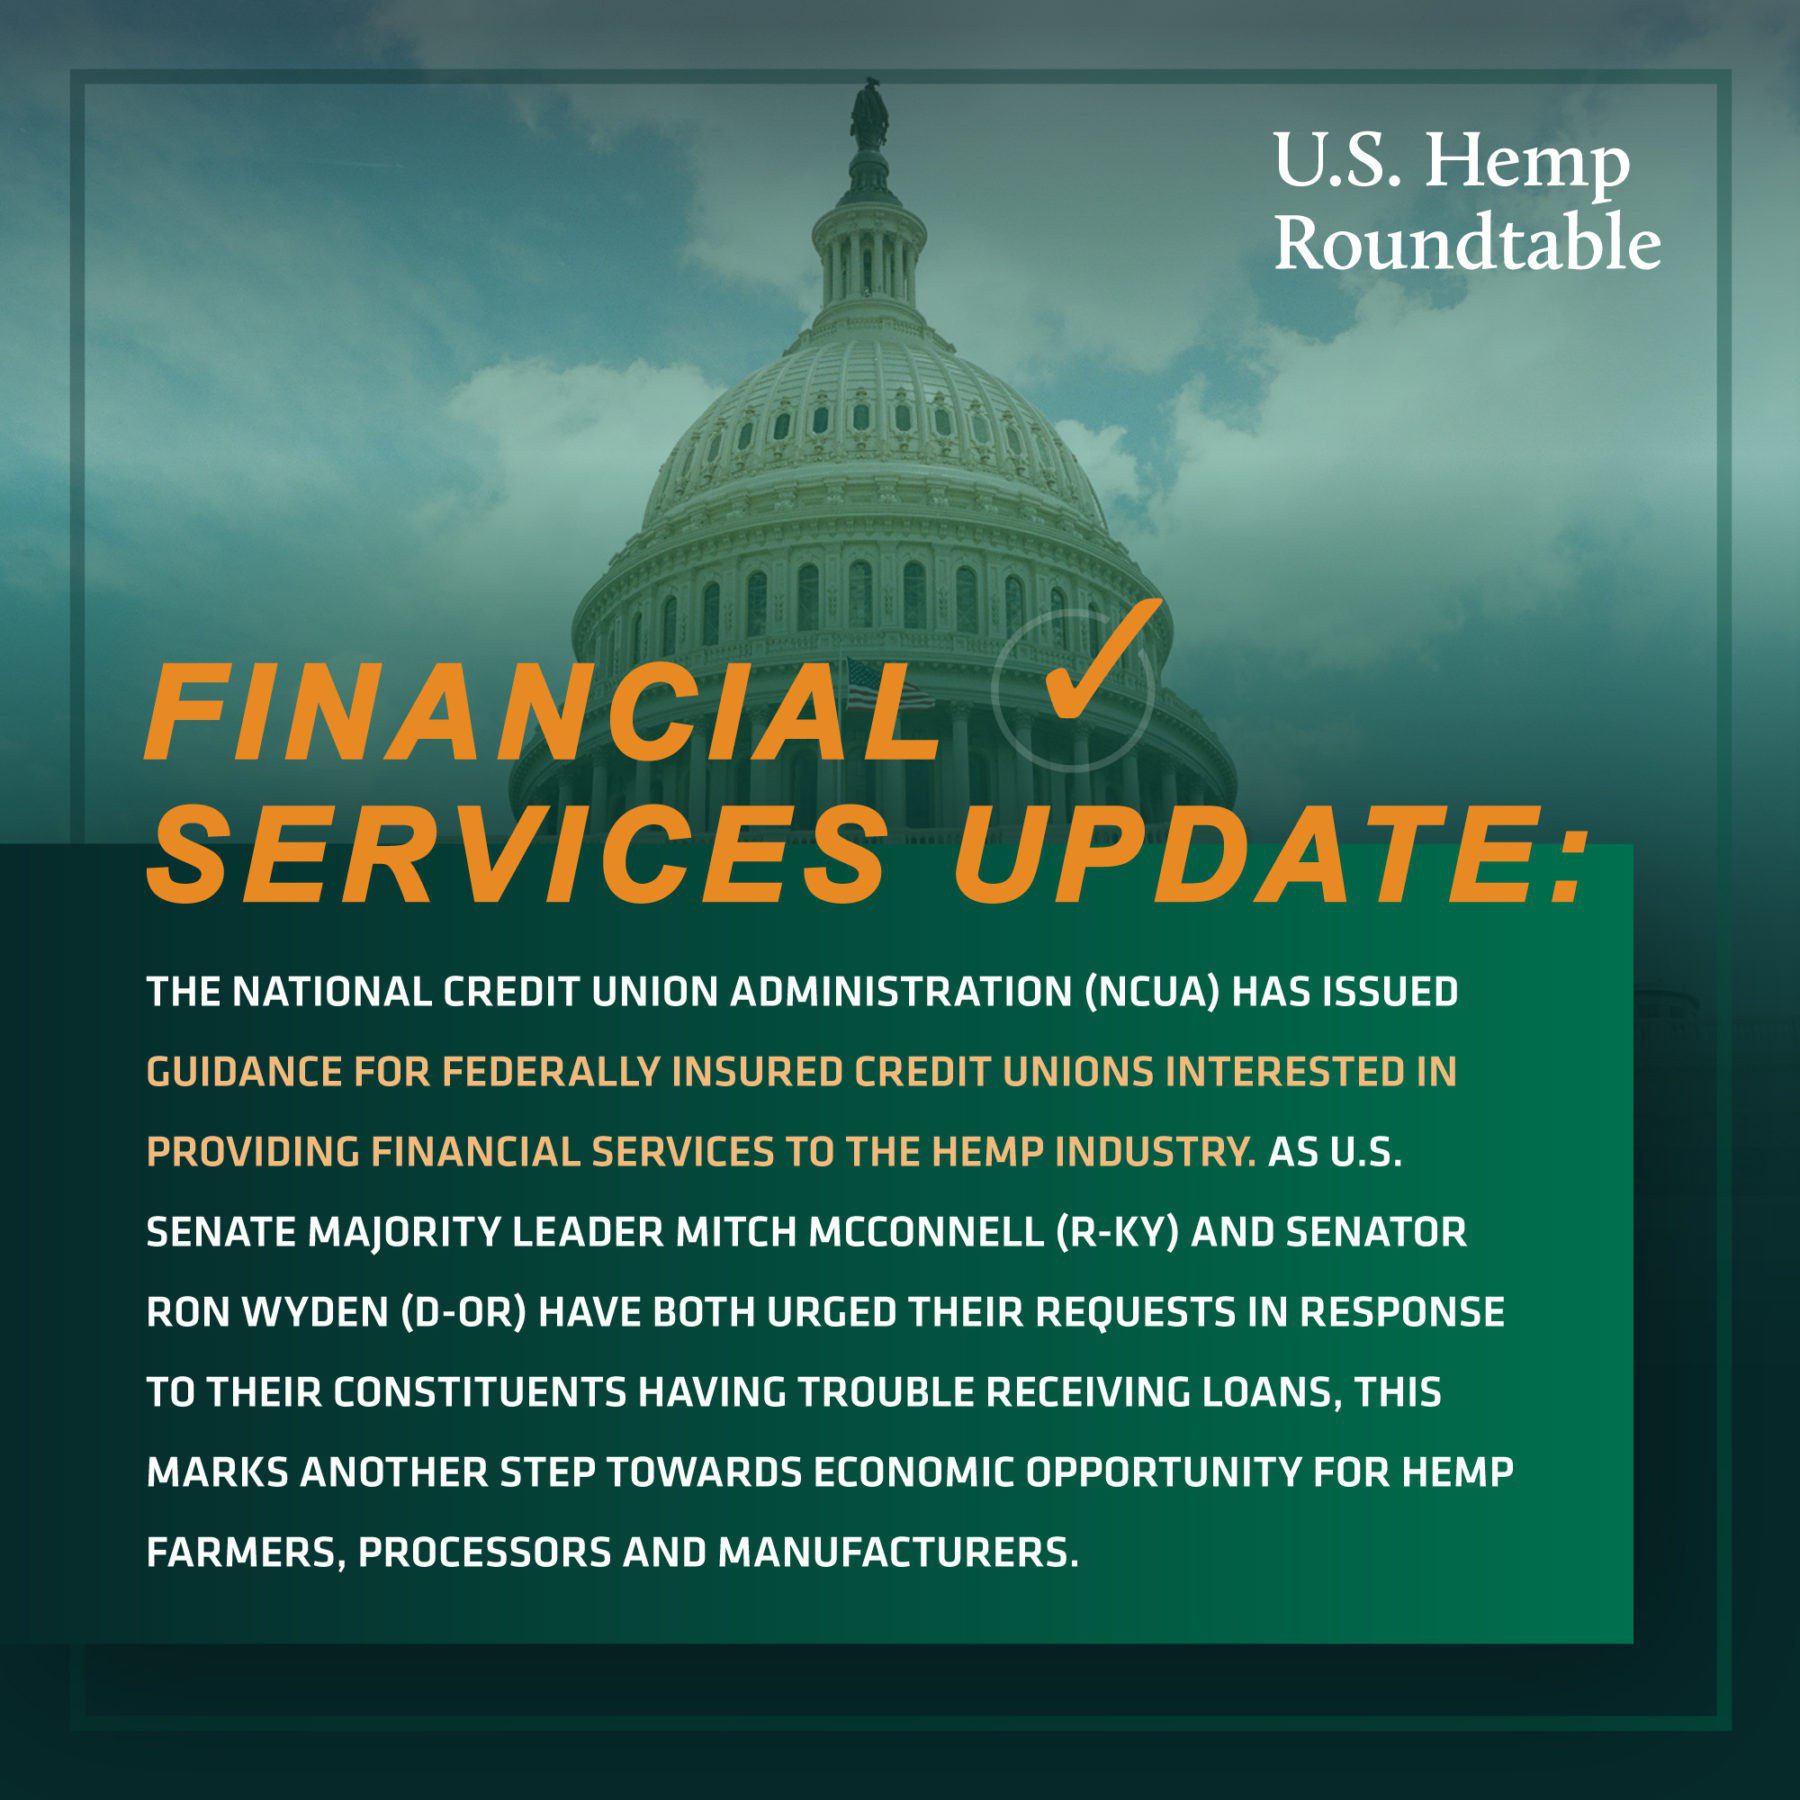 FINANCIAL SERVICES UPDATE - National Credit Union Administration Issues Guidance to Assist Legal Hemp Industry